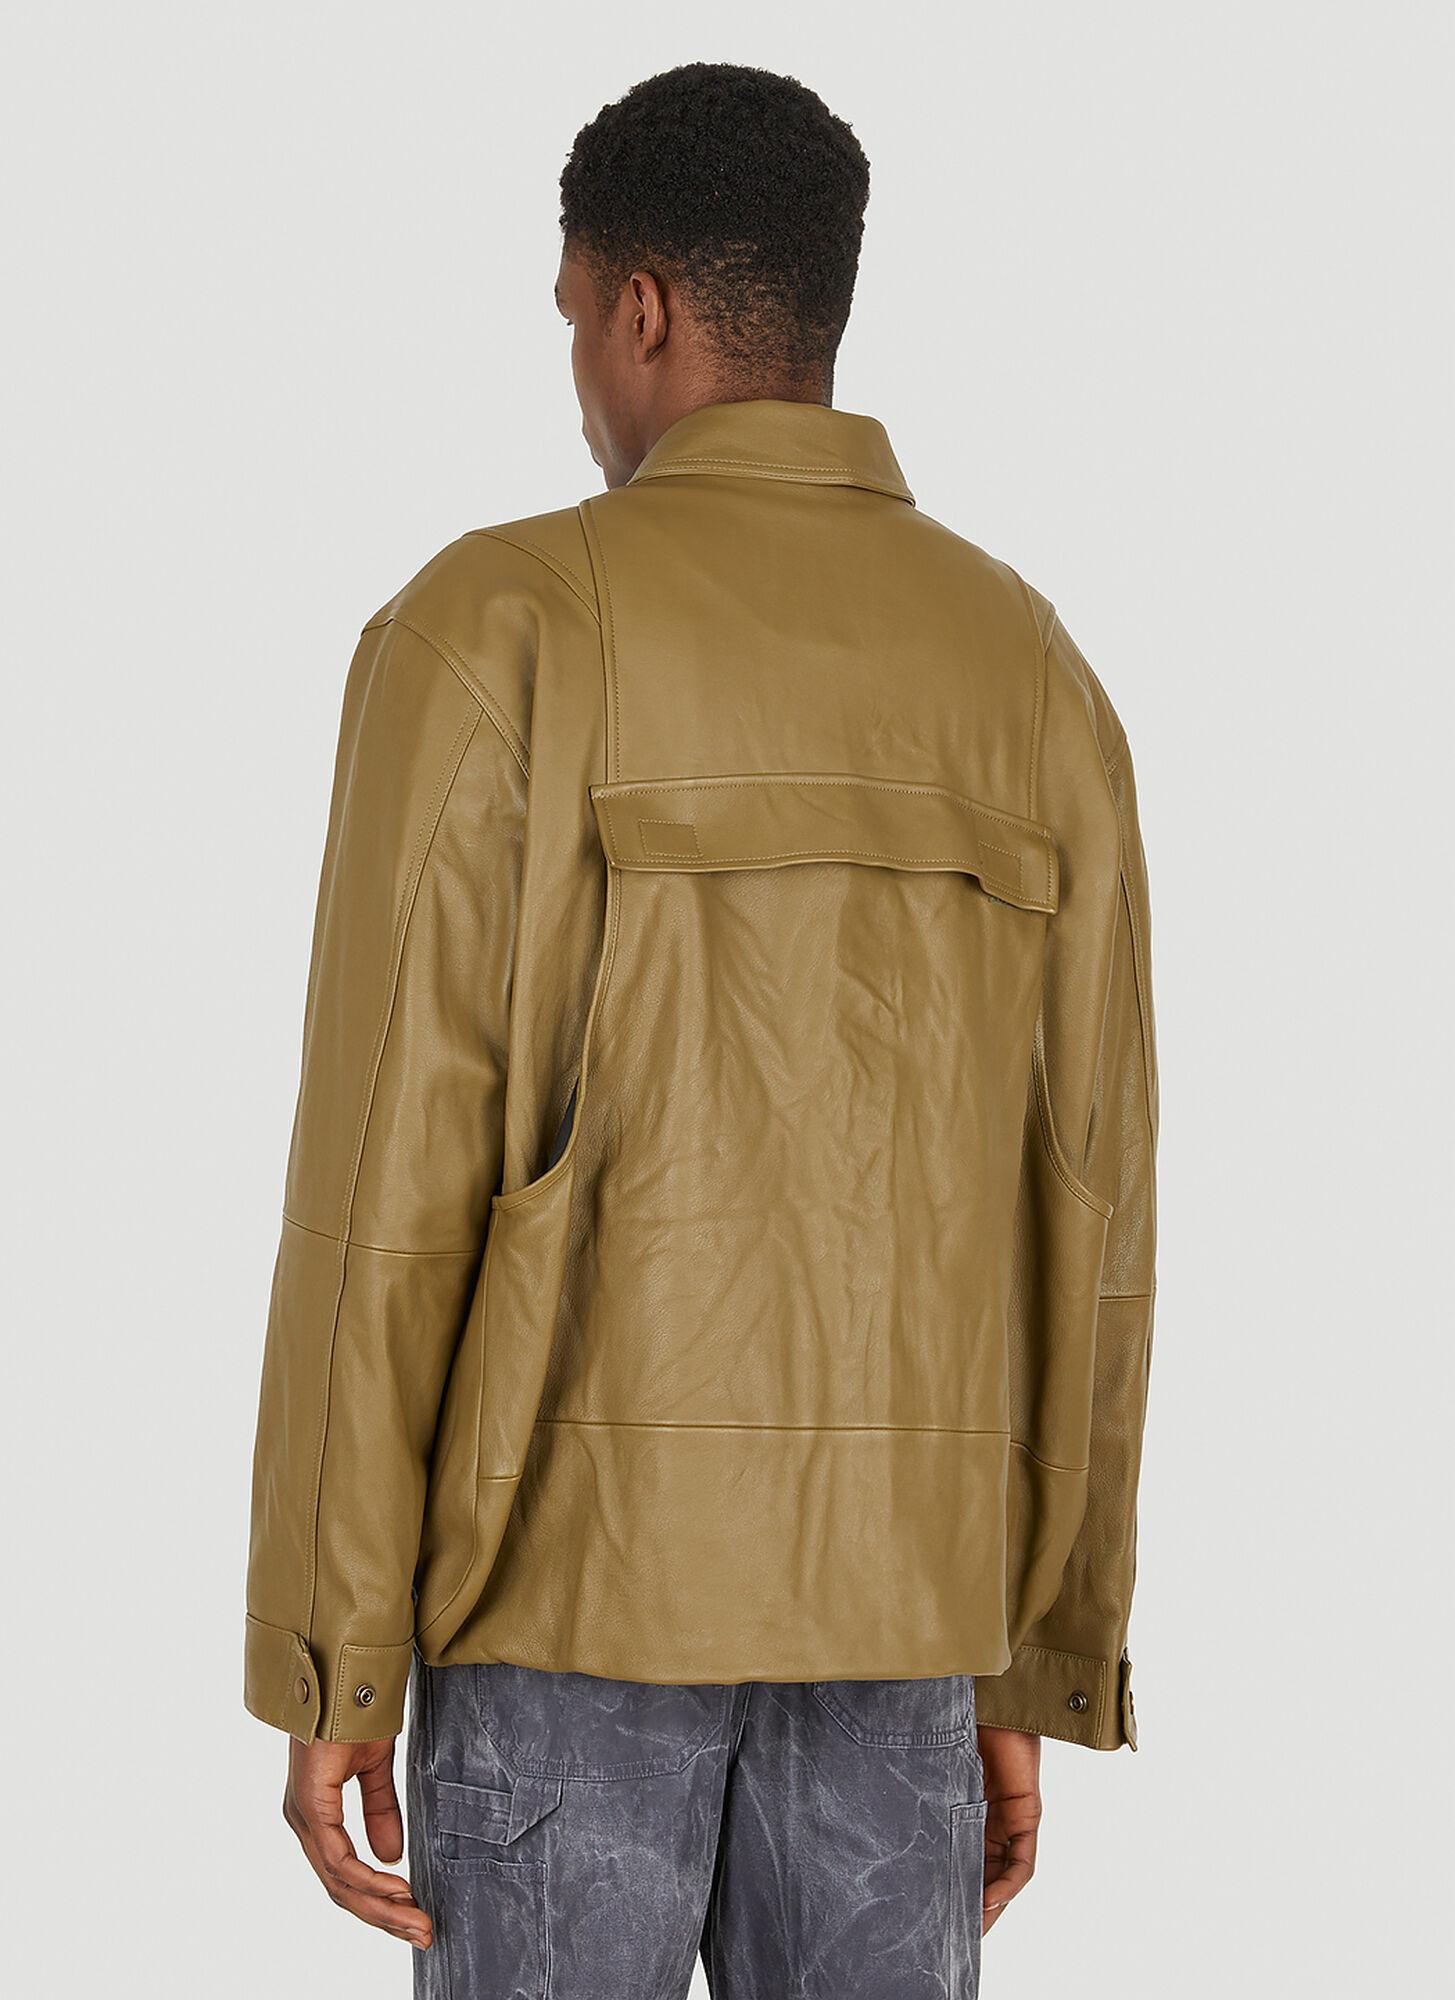 Acne Studios Pockets Leather Jacket in Green for Men | Lyst